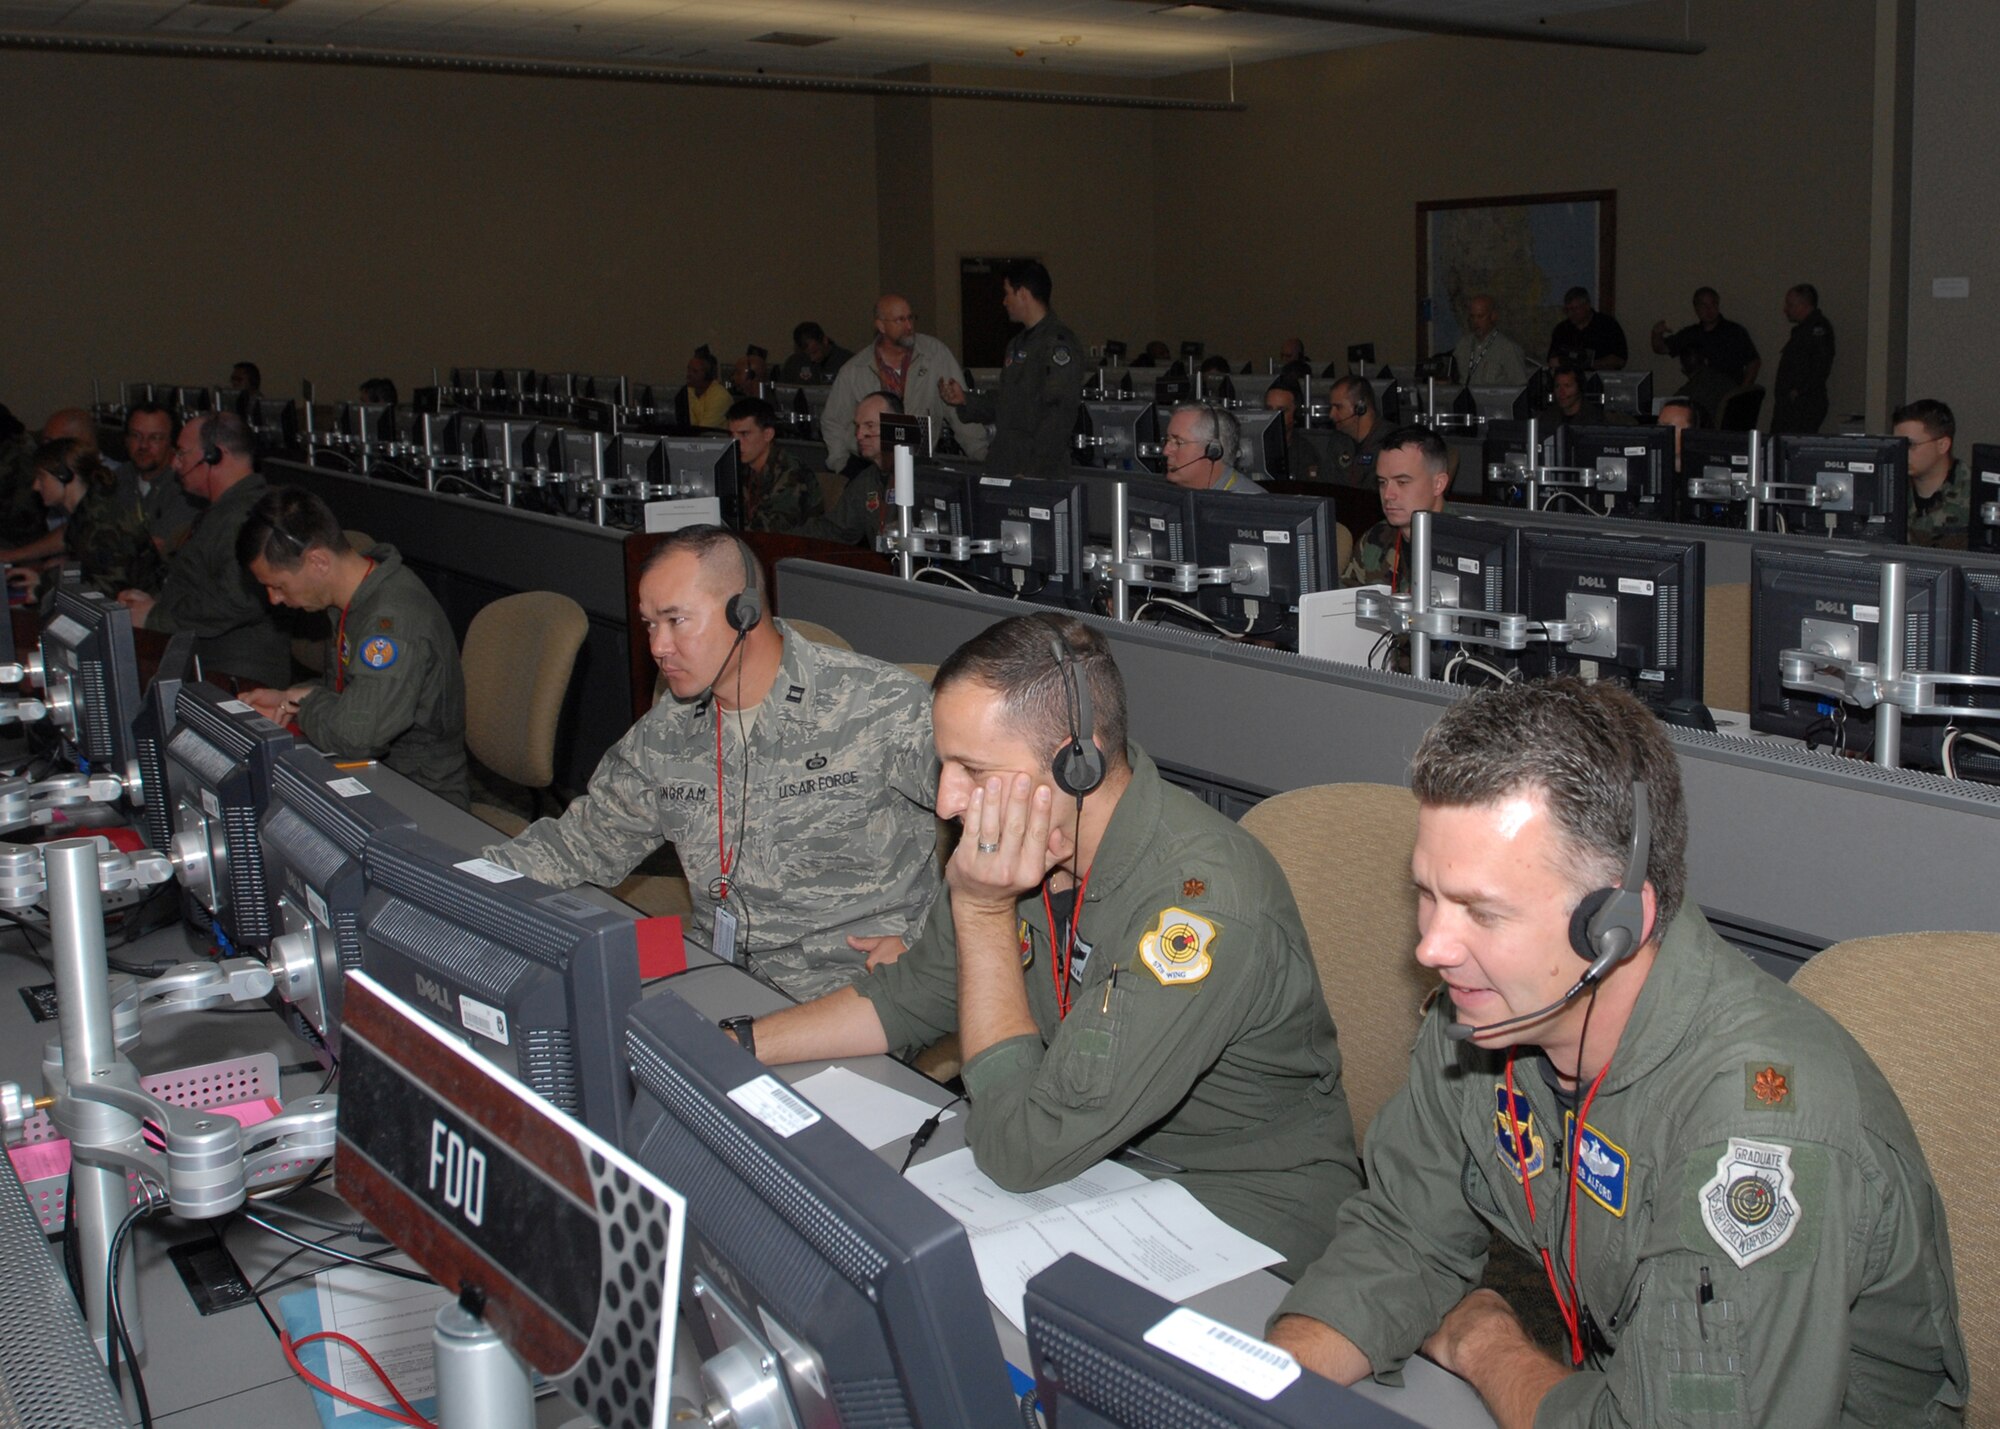 Maj. Rob Alford (right), Maj. Paul Rockway (middle), and Capt. Joe Ingram (left), students at the 505th Training Squadron, manage and monitor fighter aircraft during an end of course exercise March 19 at Hurlburt Field. The exercise tests operational level command and control in an air operations center. (U.S. Air Force photo/Airman 1st Class Jason Epley)